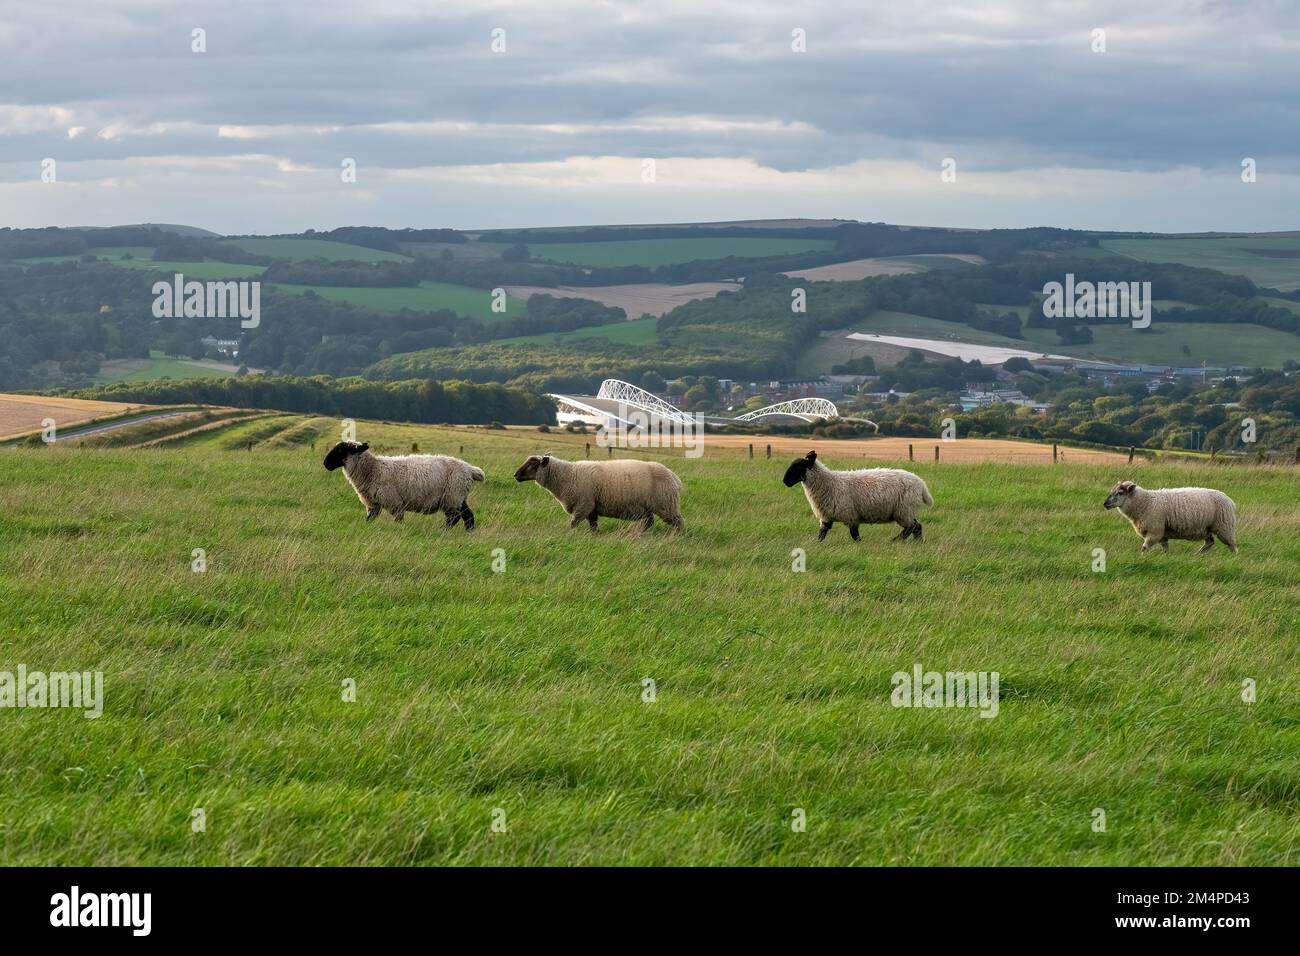 Sheep-Ovis aries walking in front of the Amex Stadium, Falmer, East Sussex, England, Uk Stock Photo